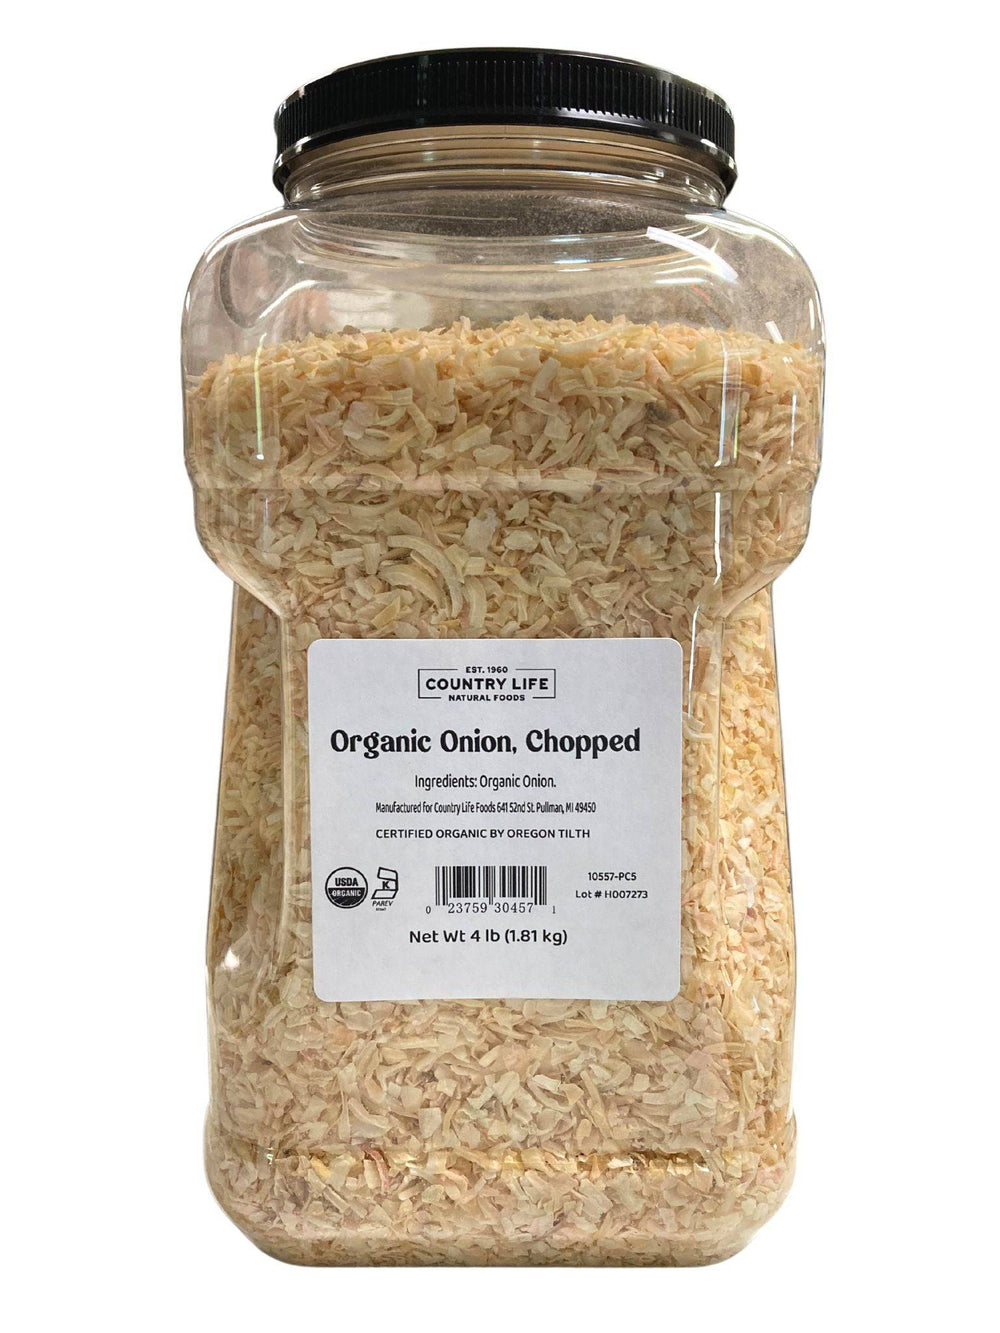 Organic Onion, Chopped - Country Life Natural Foods